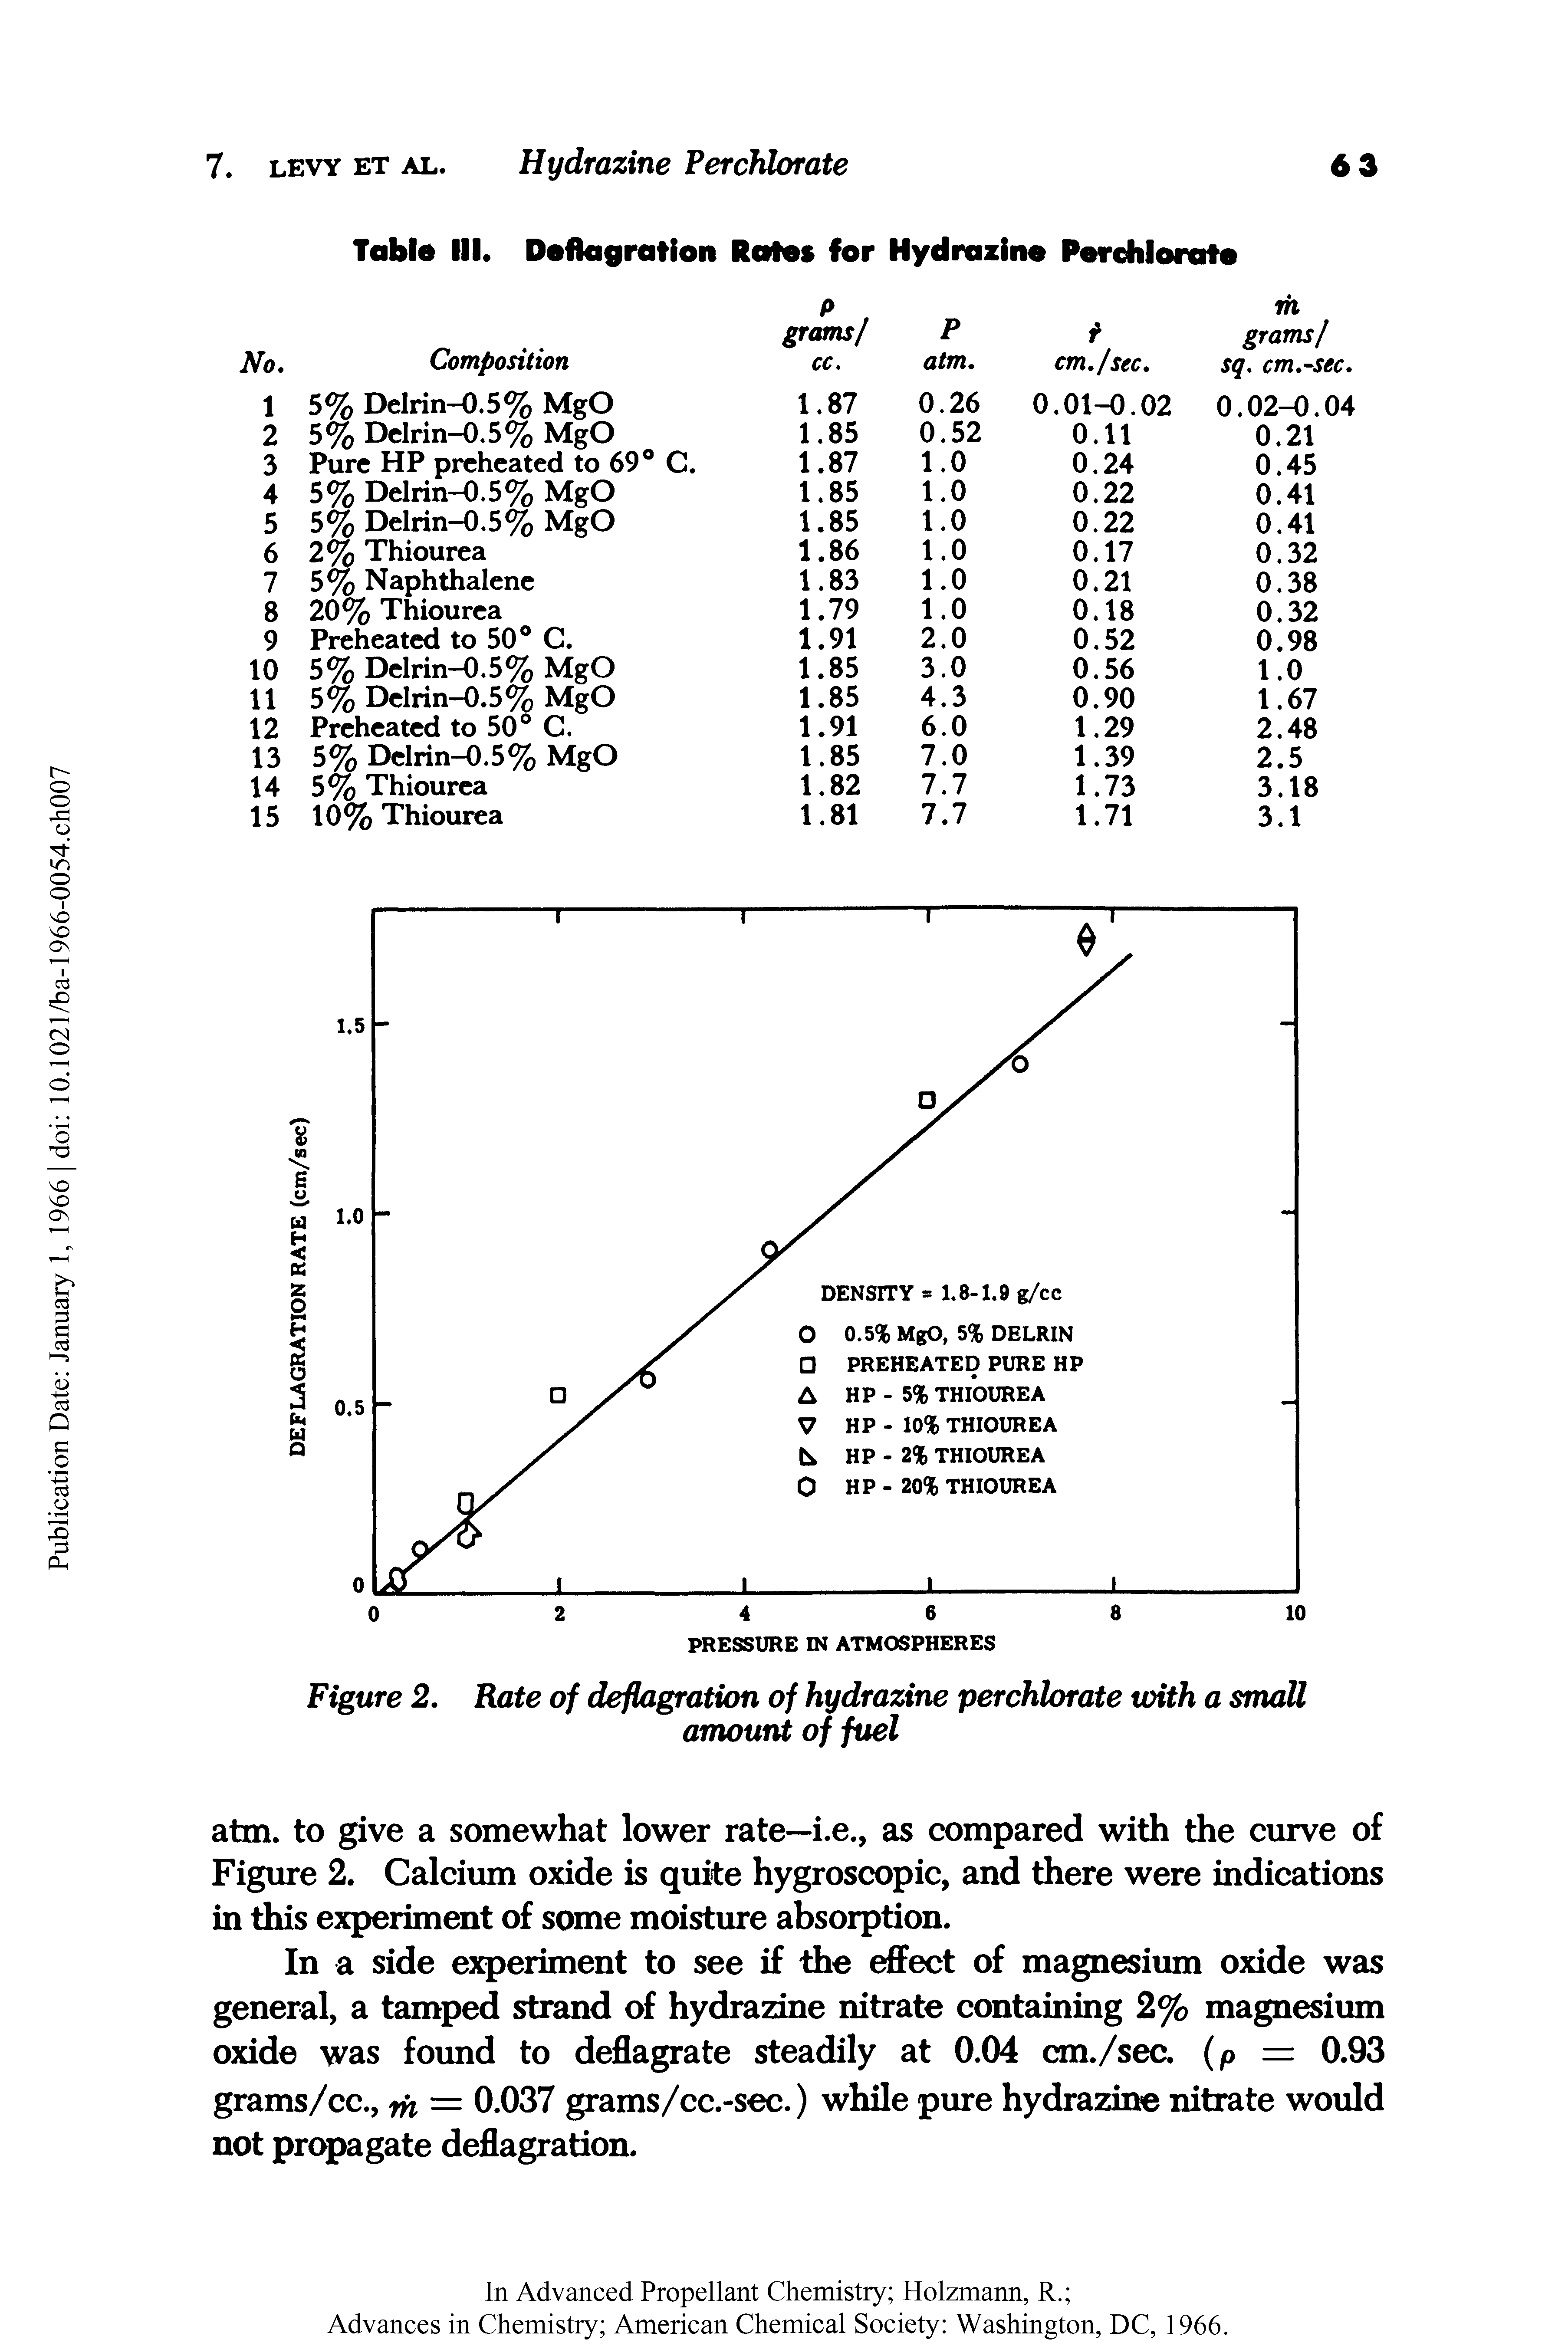 Figure 2. Rate of deflagration of hydrazine perchlorate with a small amount of fuel...